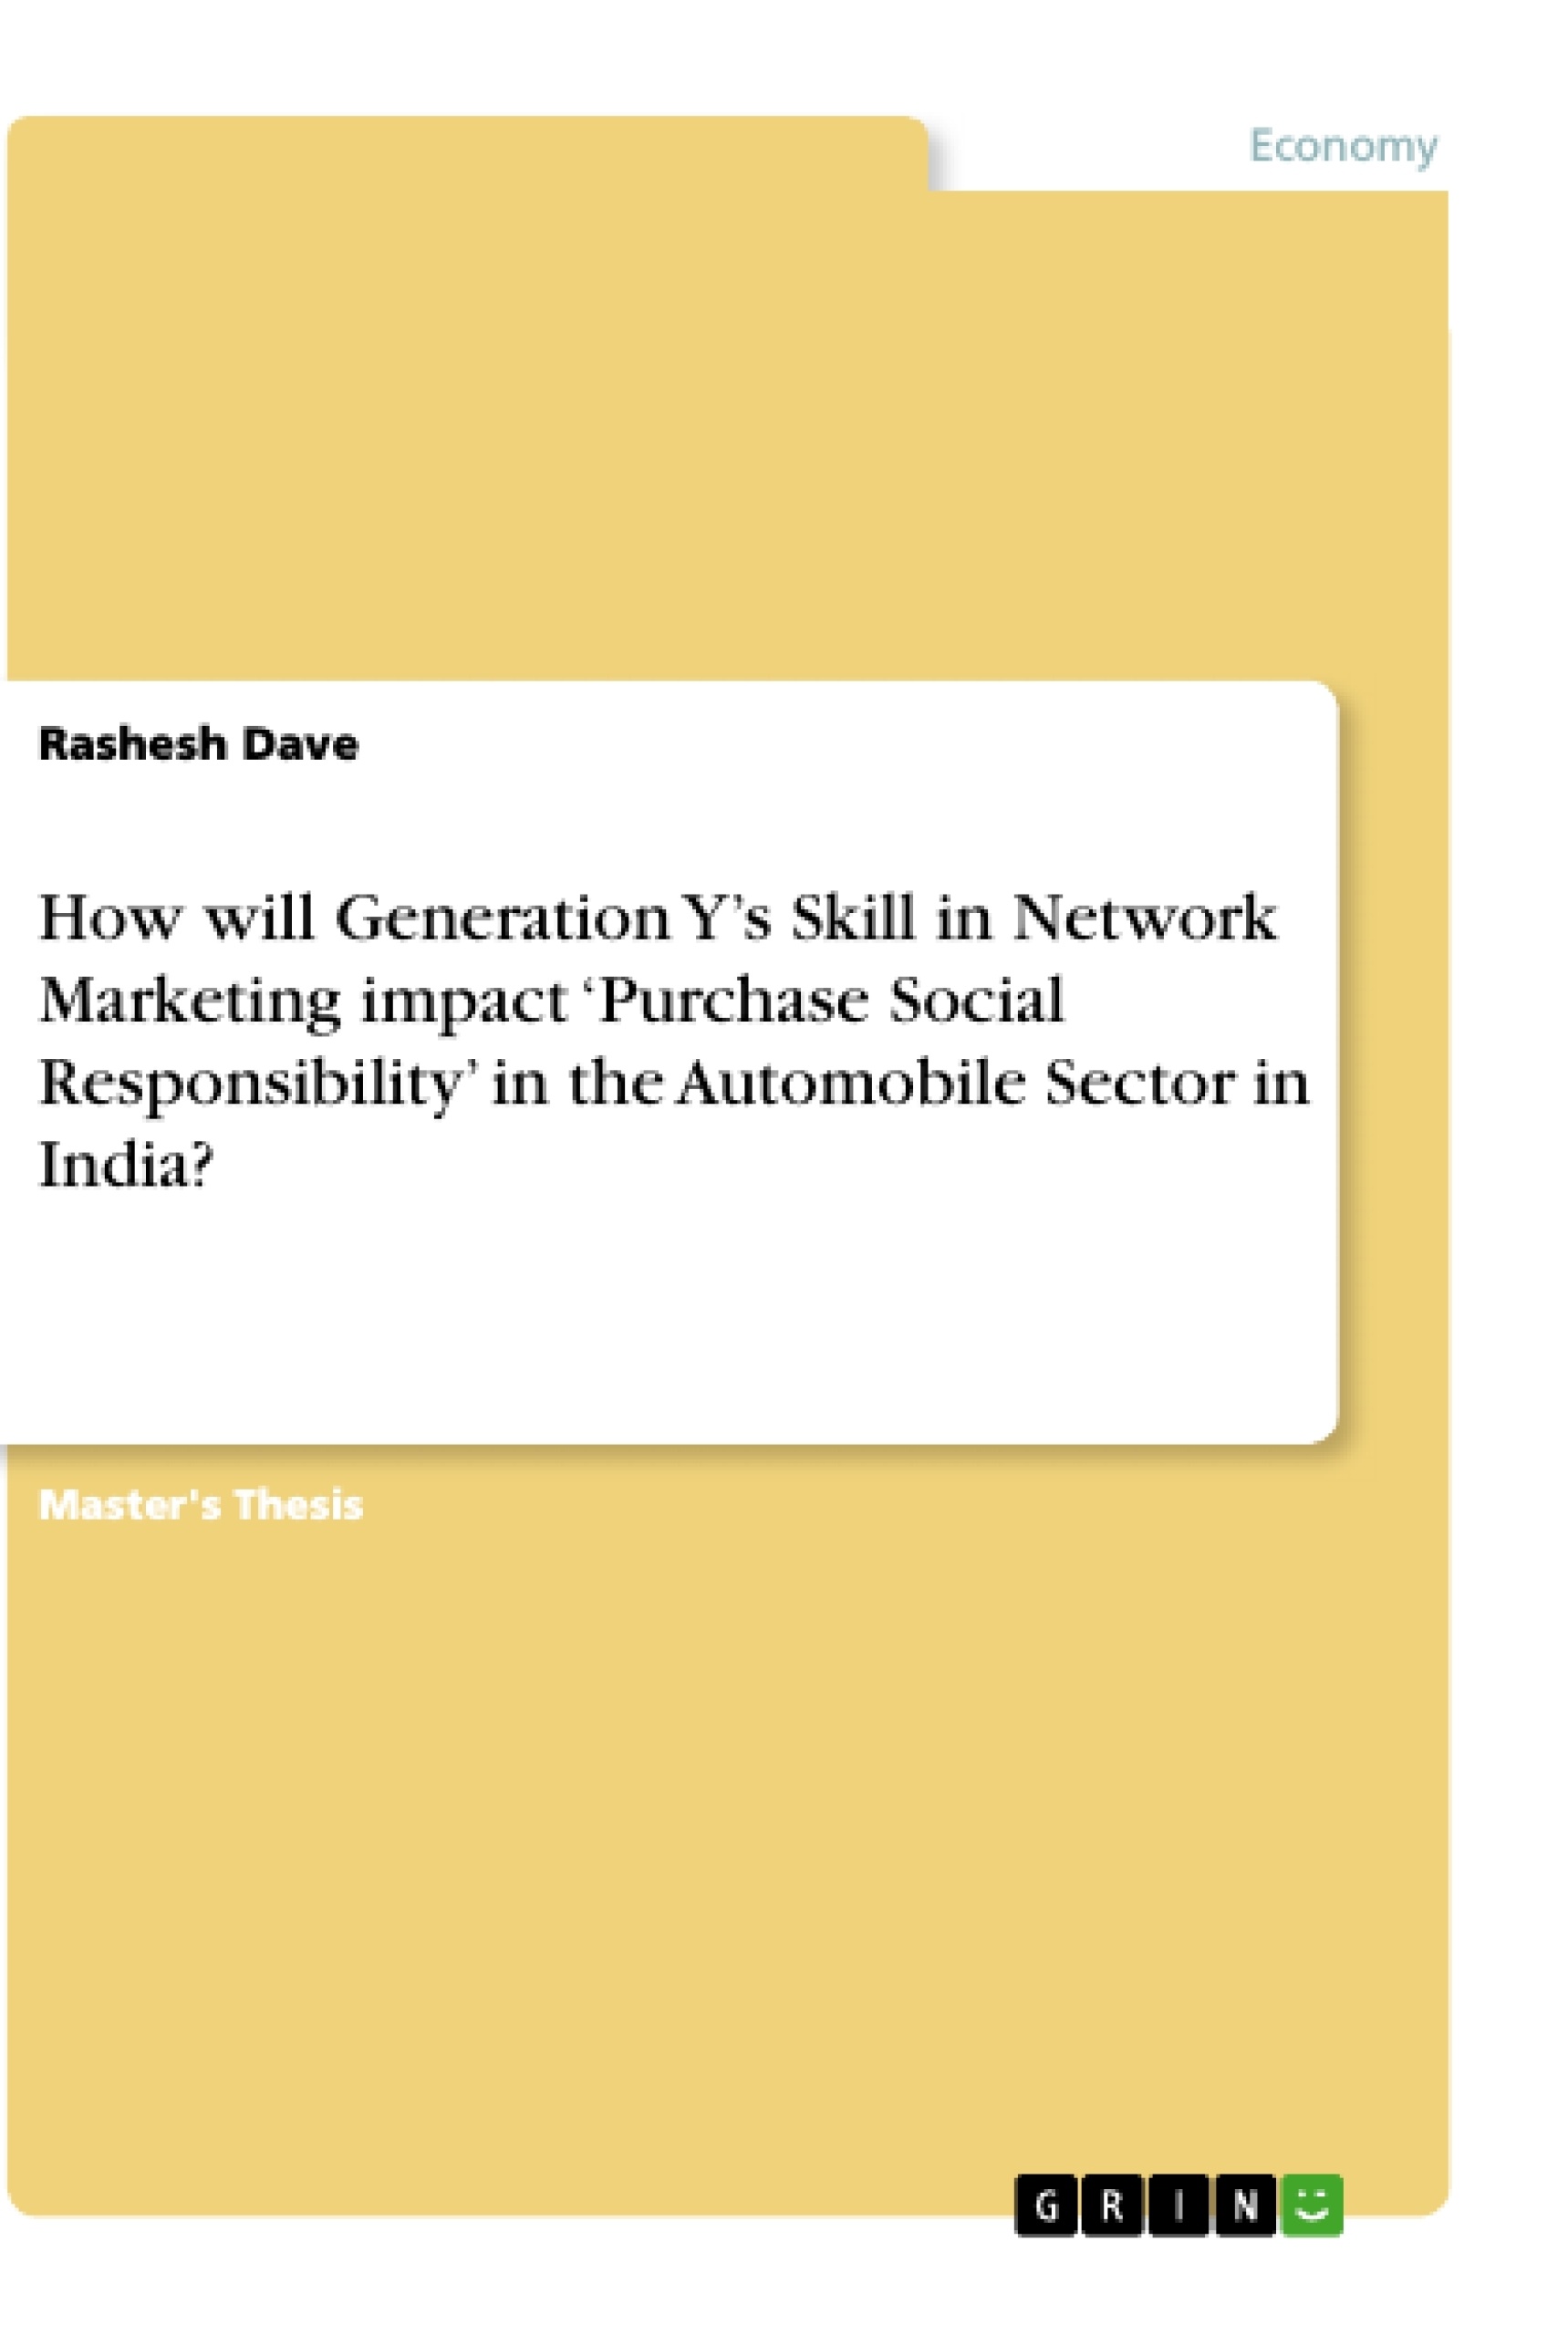 Title: How will Generation Y’s Skill in Network Marketing impact ‘Purchase Social Responsibility’ in the Automobile Sector in India?